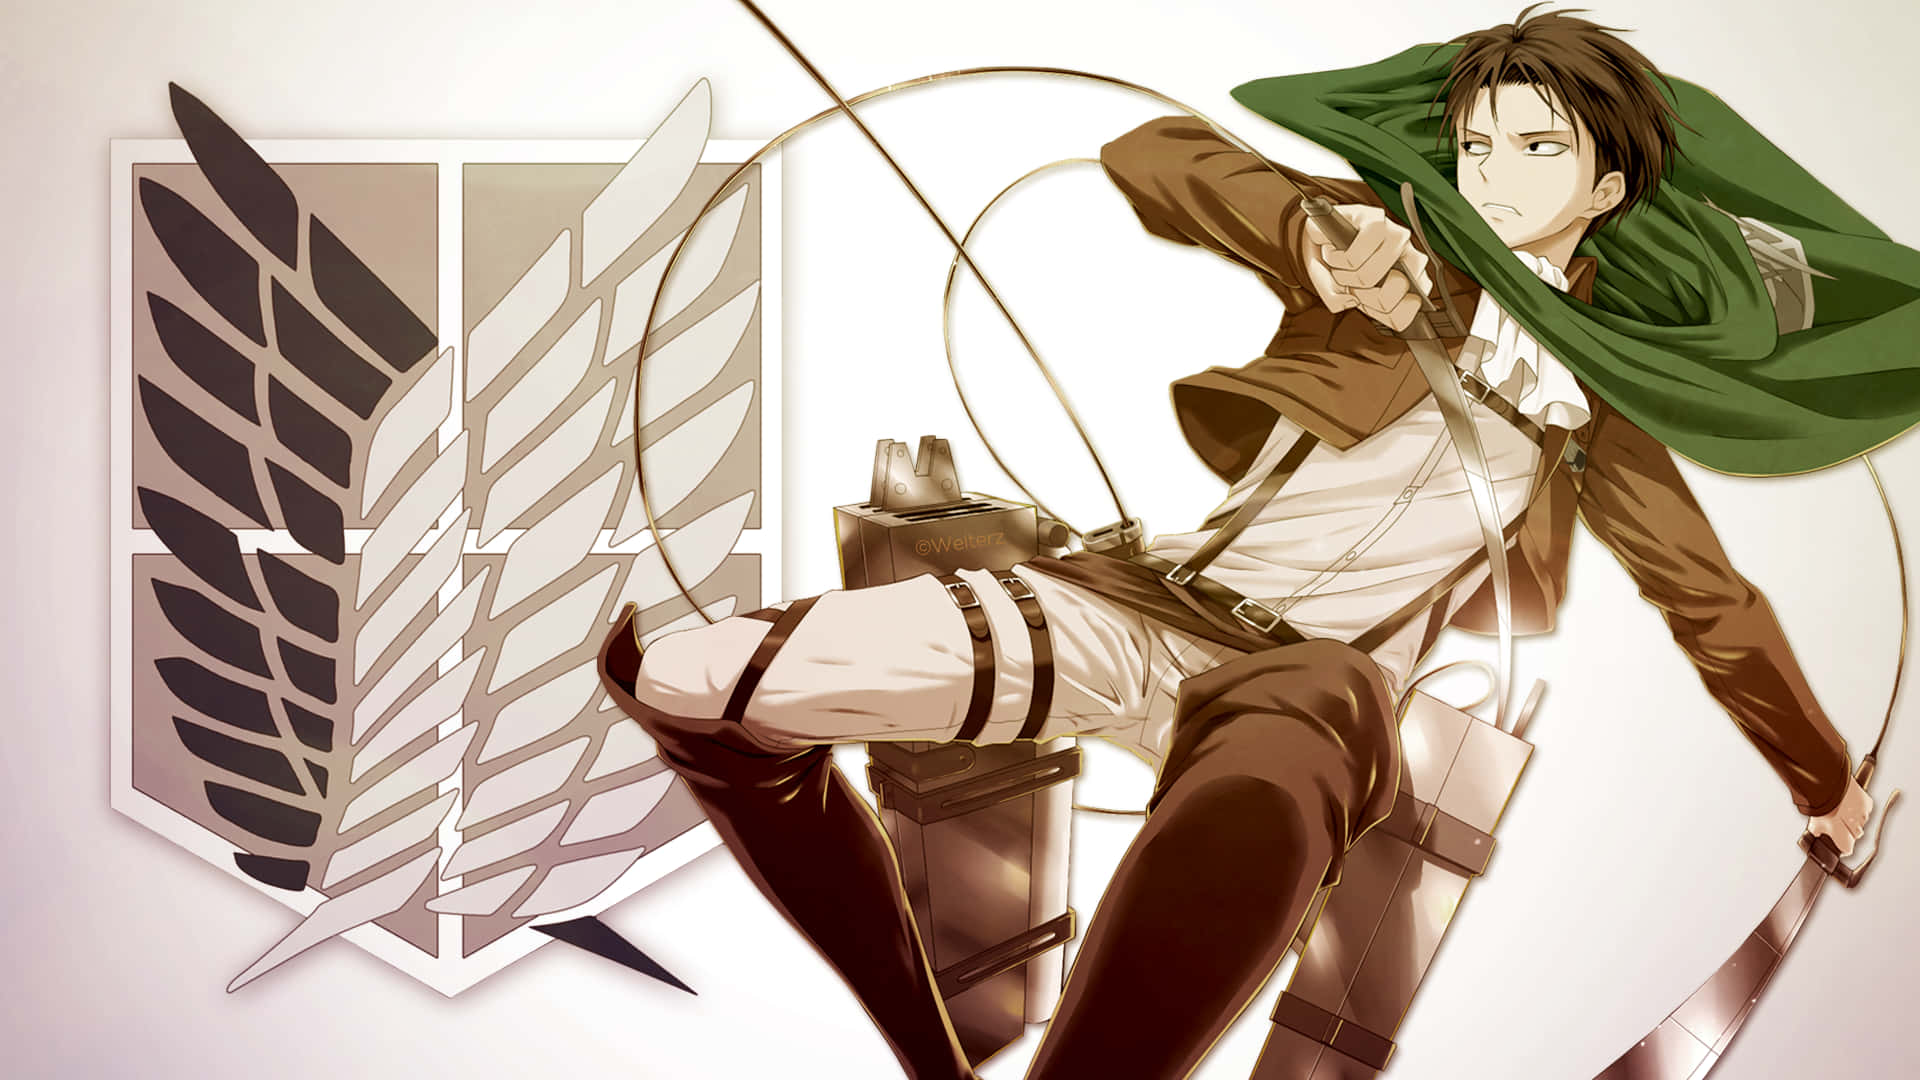 Attack On Titan Powers Up with Levi Wallpaper